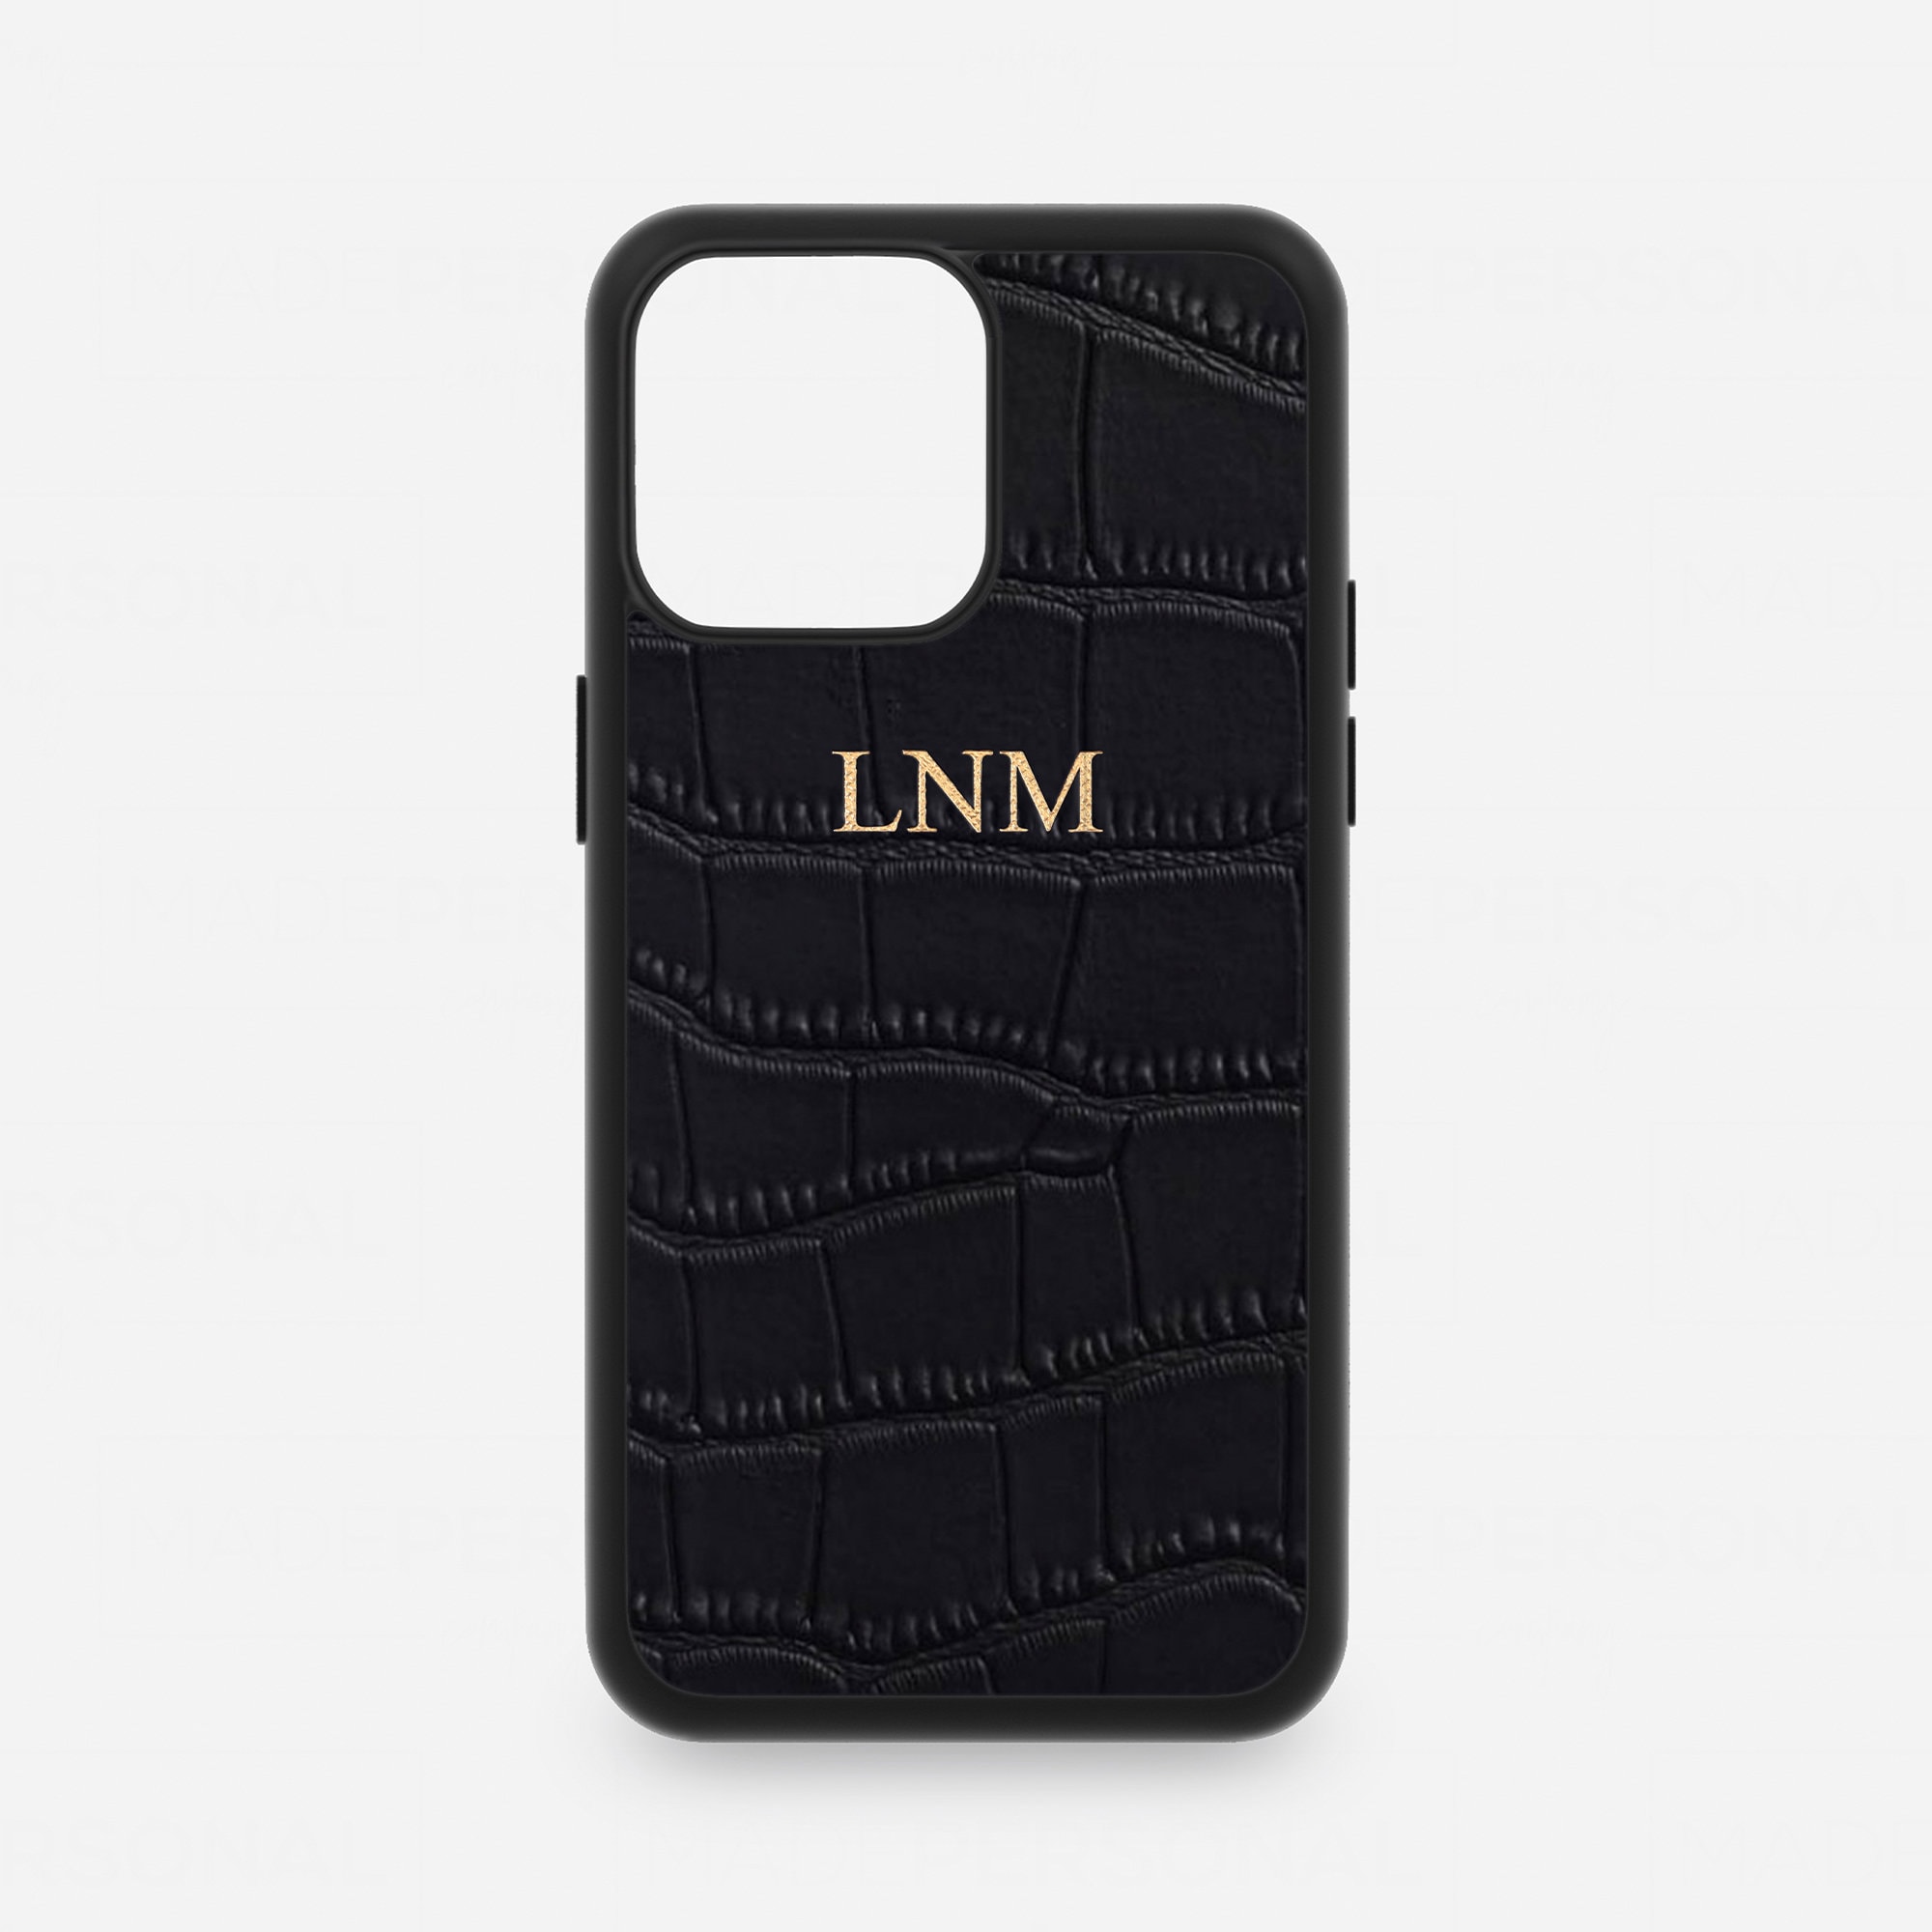 Bulk-buy Hot Selling Wholesaler Mobile Phone Cases for LV Cases Price Good  and Top Quality Phone Shell for iPhone 13 12 11 PRO Max X/Xs Xr with Fast  Delivery price comparison